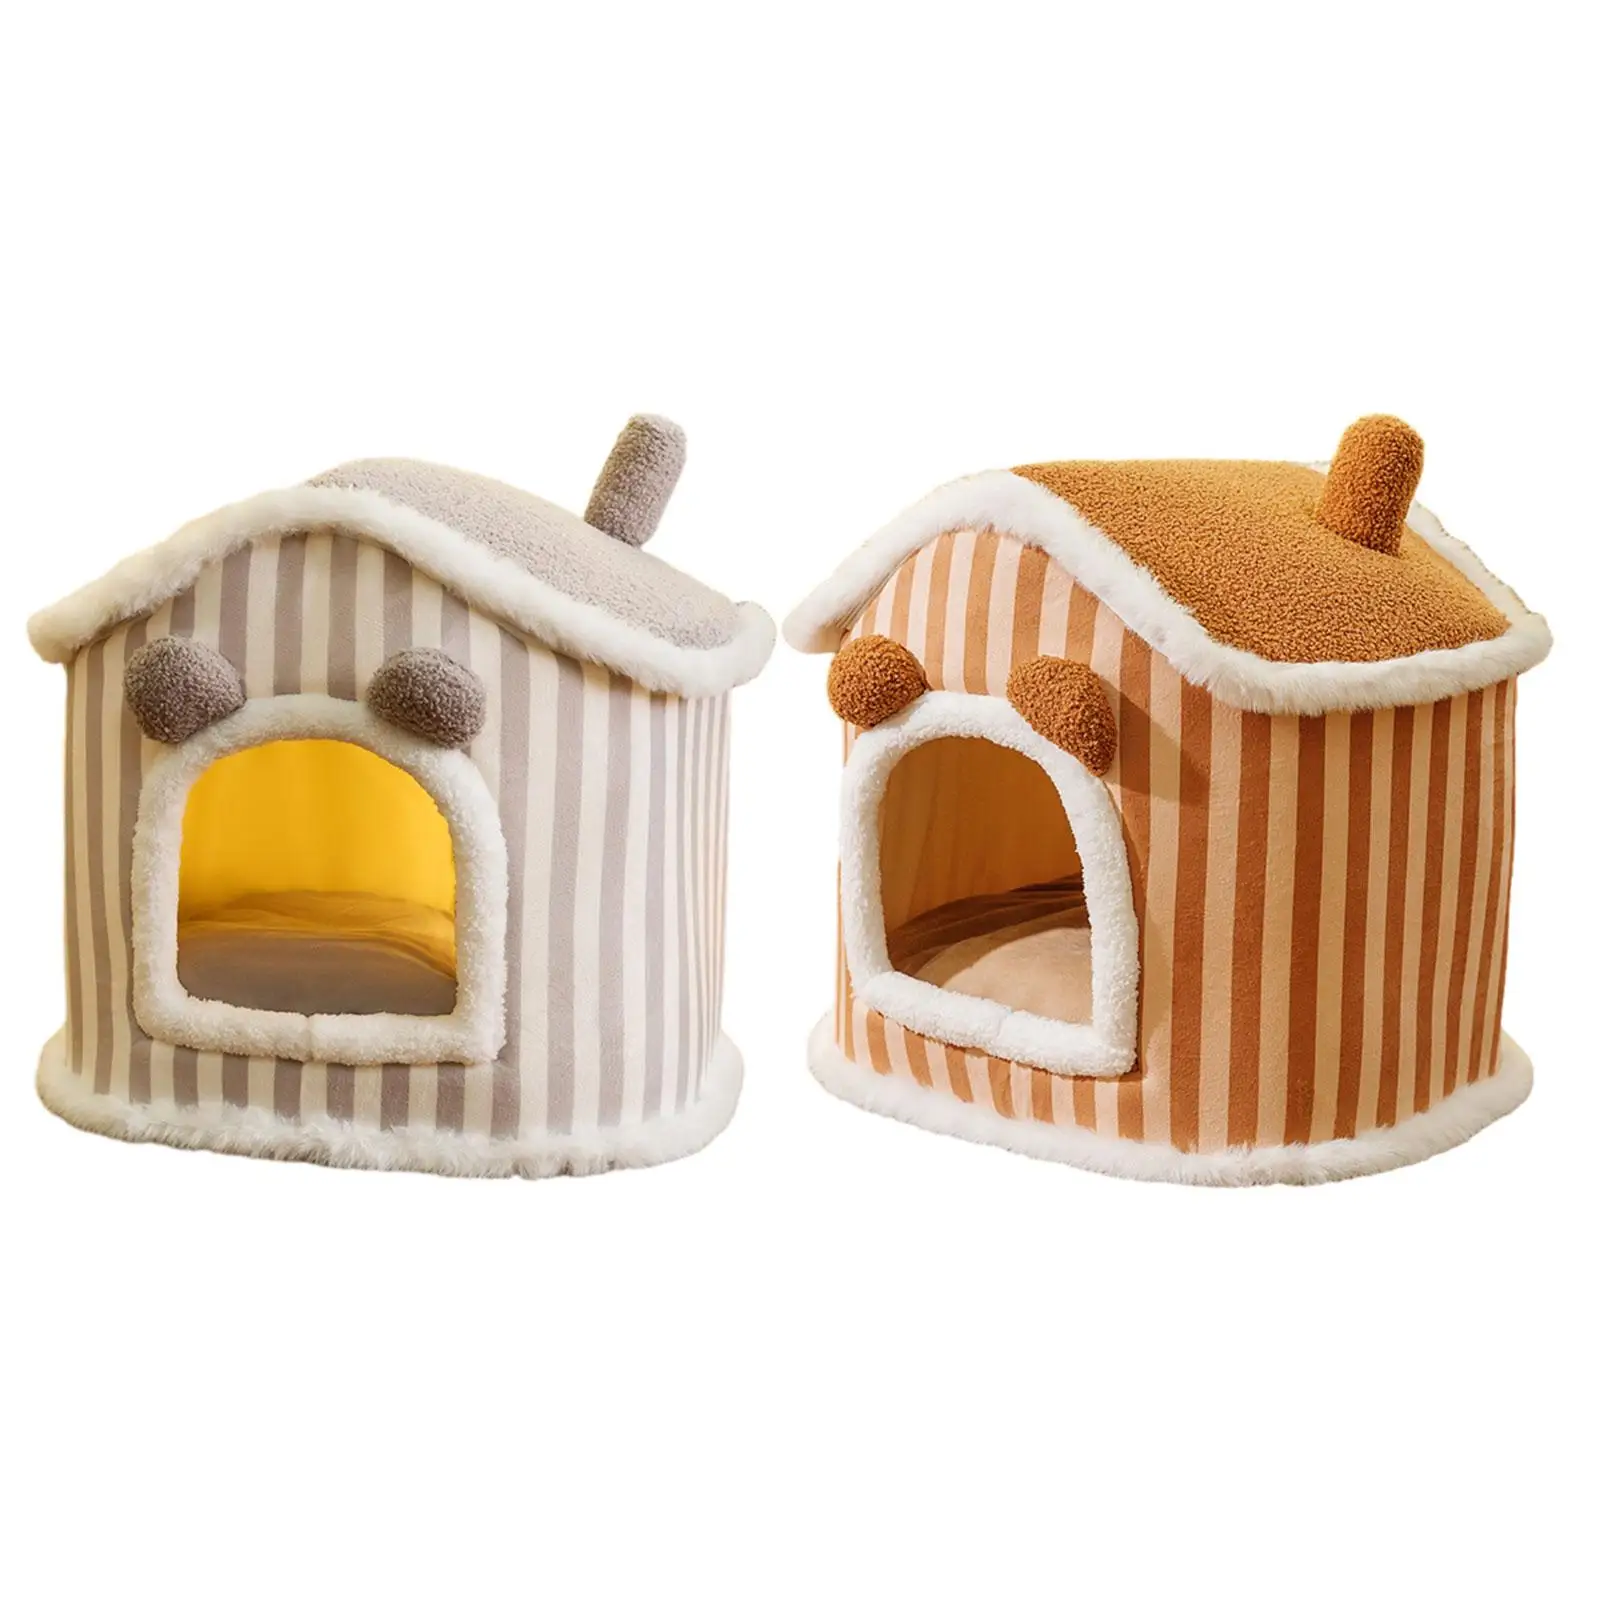 Lovely Cat Bed House Warm Removable Pet Cushion Indoor Cats Soft Cats Tent Anti Slip Bottom Kitten Kitty Shelter Huts Pet Bed